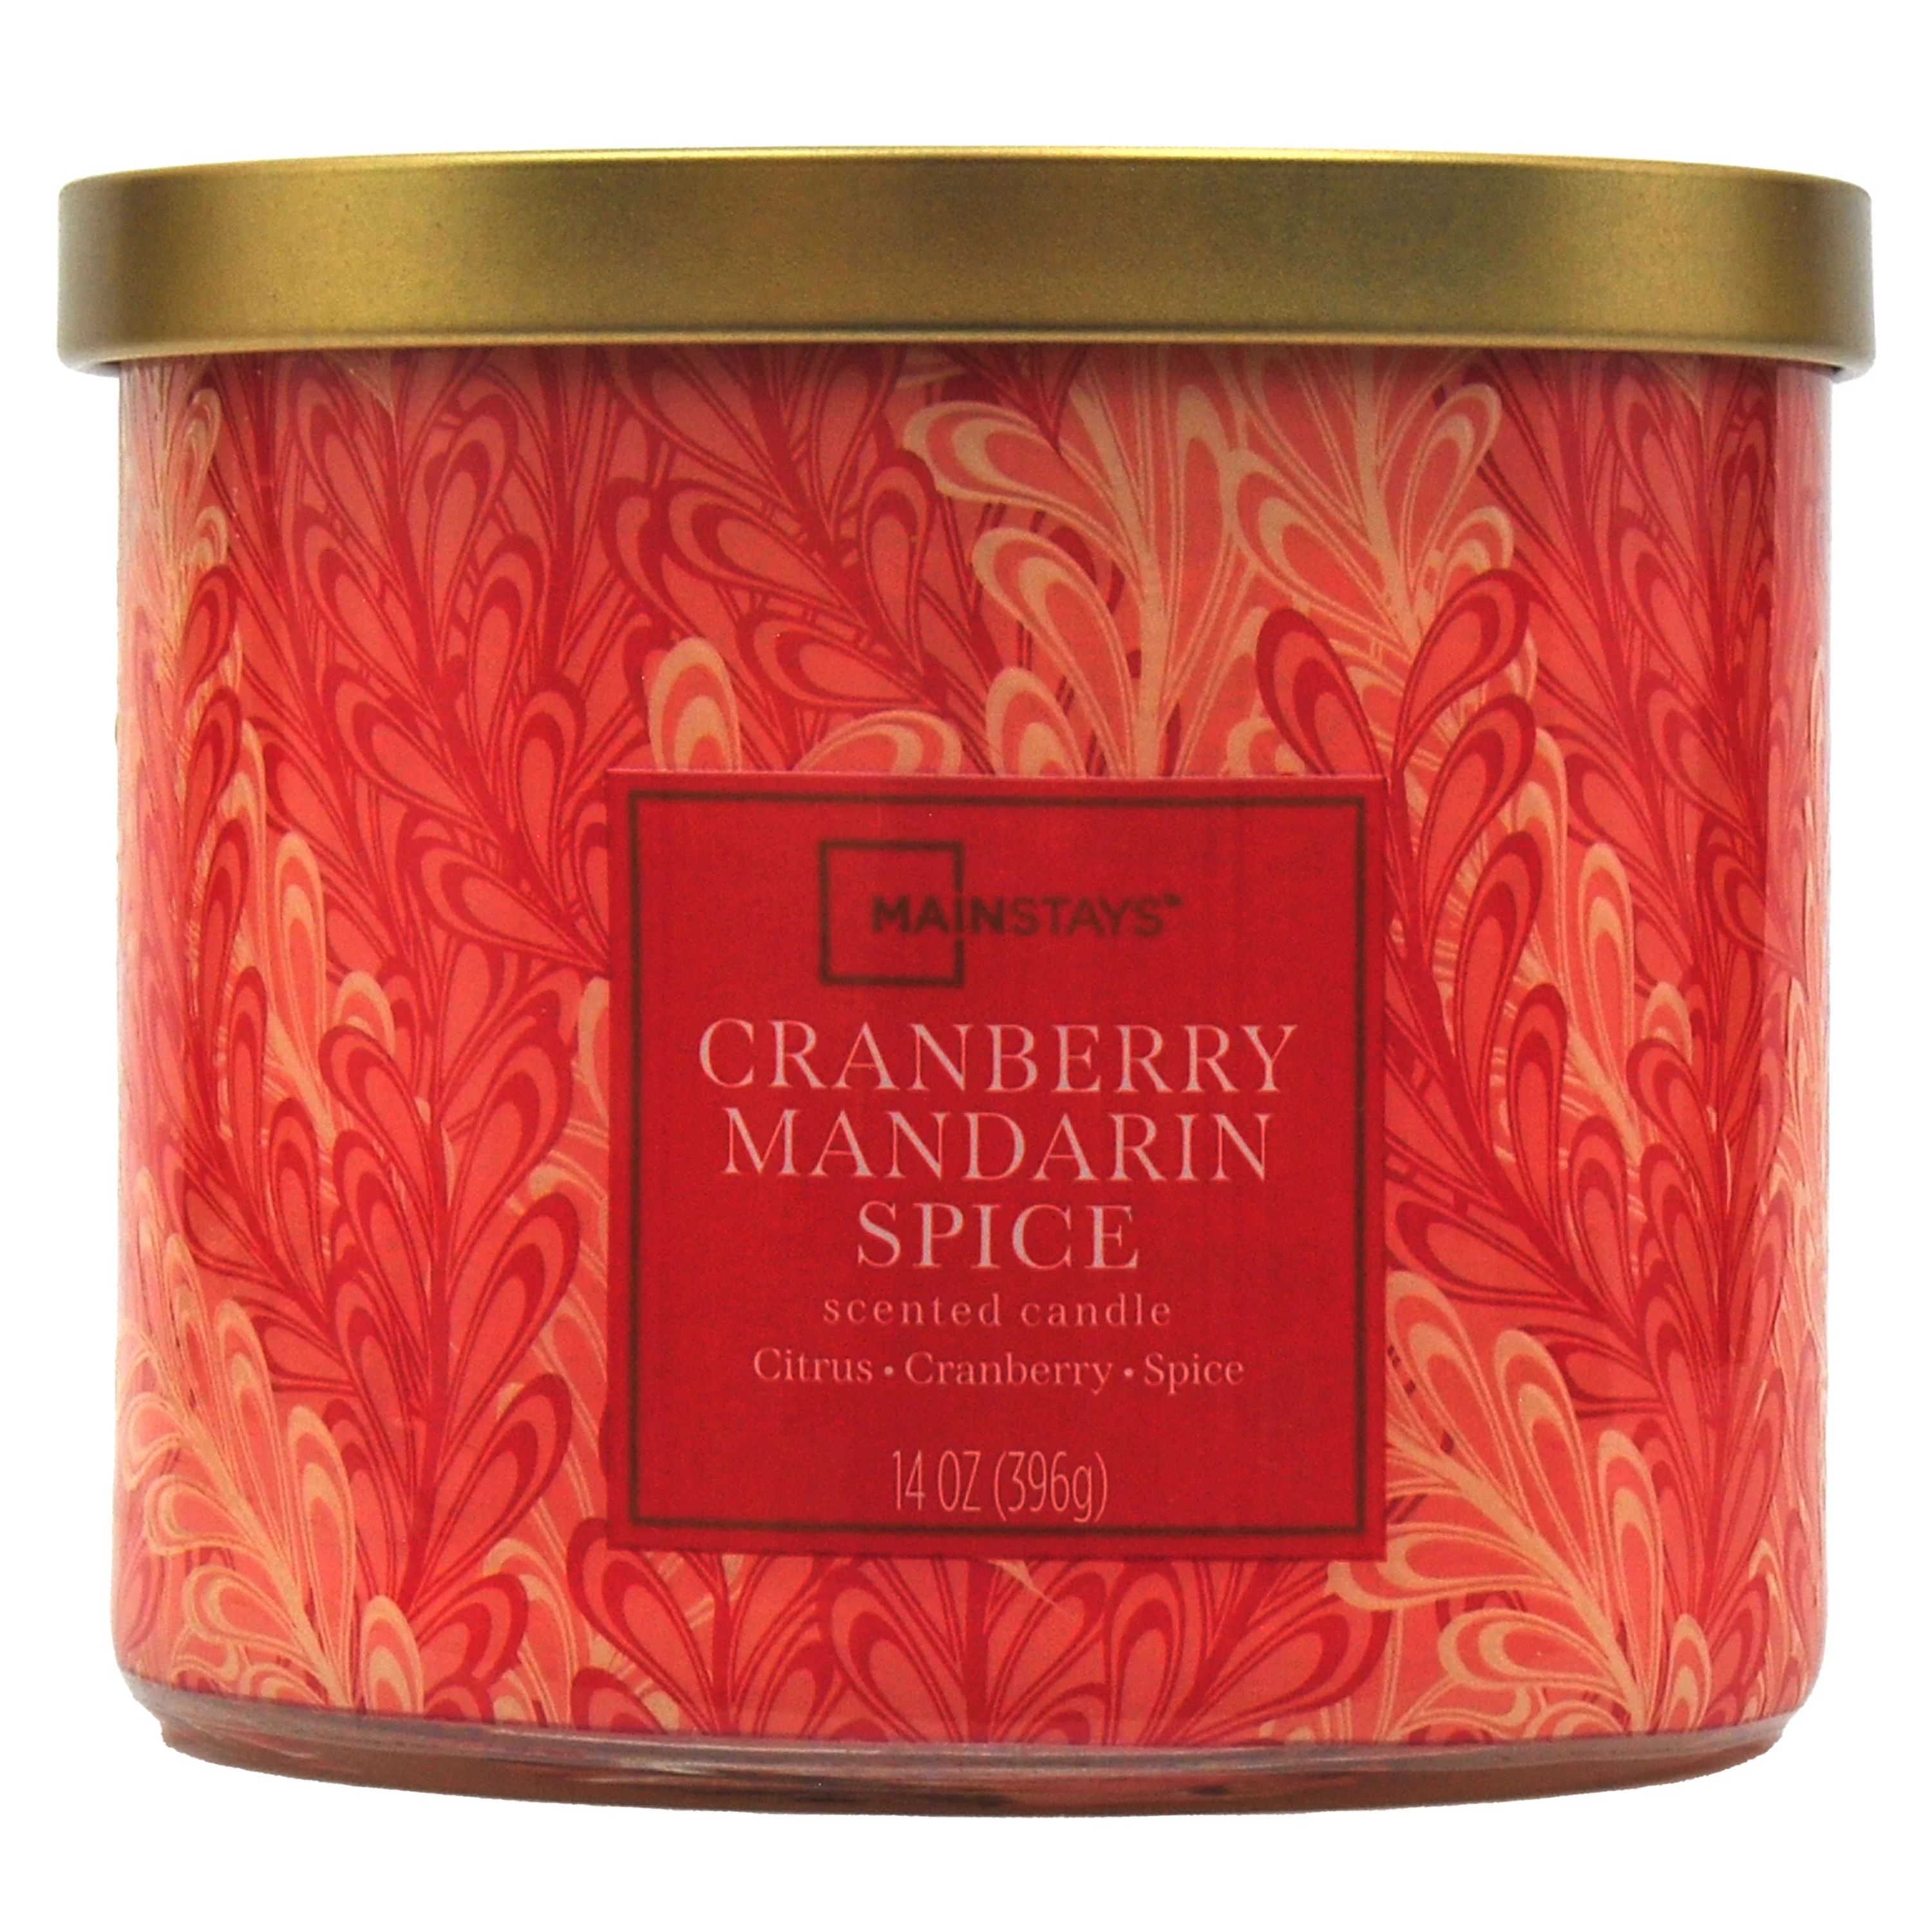 Mainstays Textured Wrap 3 Wick Cranberry Mandarin Spice Candle, 14 Ounce | Walmart (US)